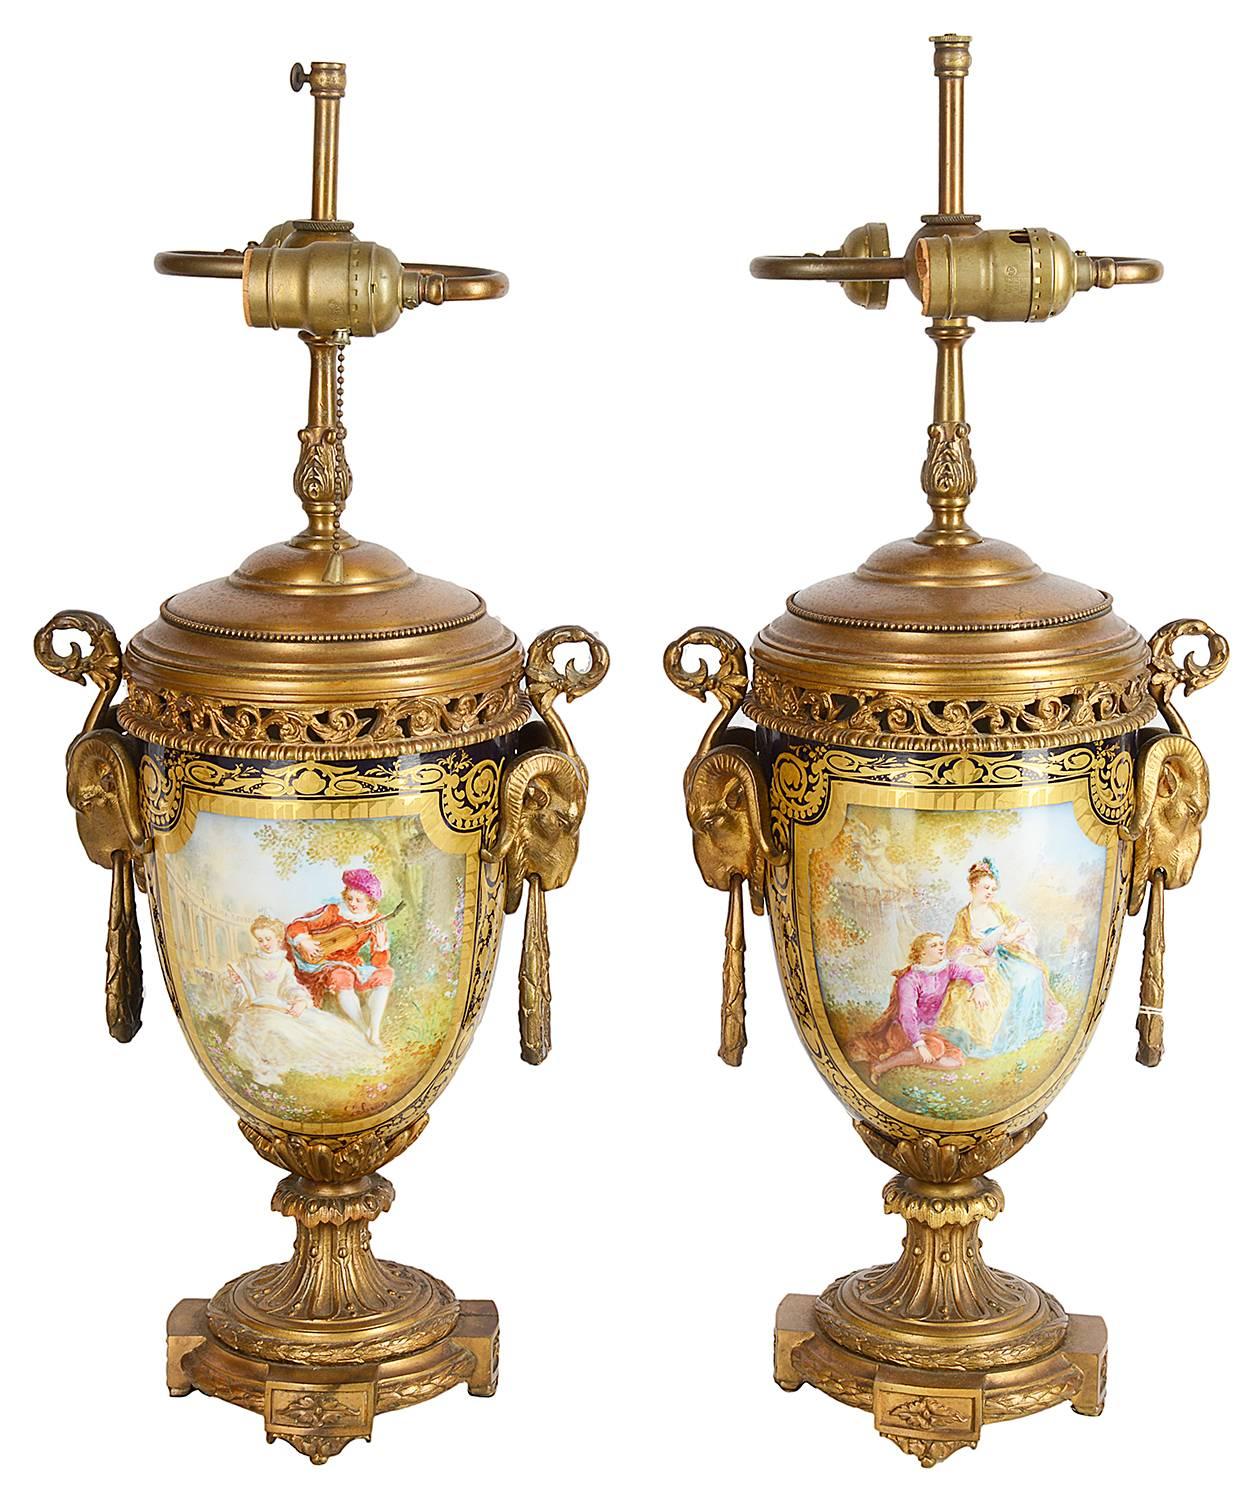 A good quality pair of French Sevres style, ormolu-mounted vases or lamps. Each with Rams head mounts, a cobalt blue ground with gilded decoration around painted panels depicting classical romantic scenes.